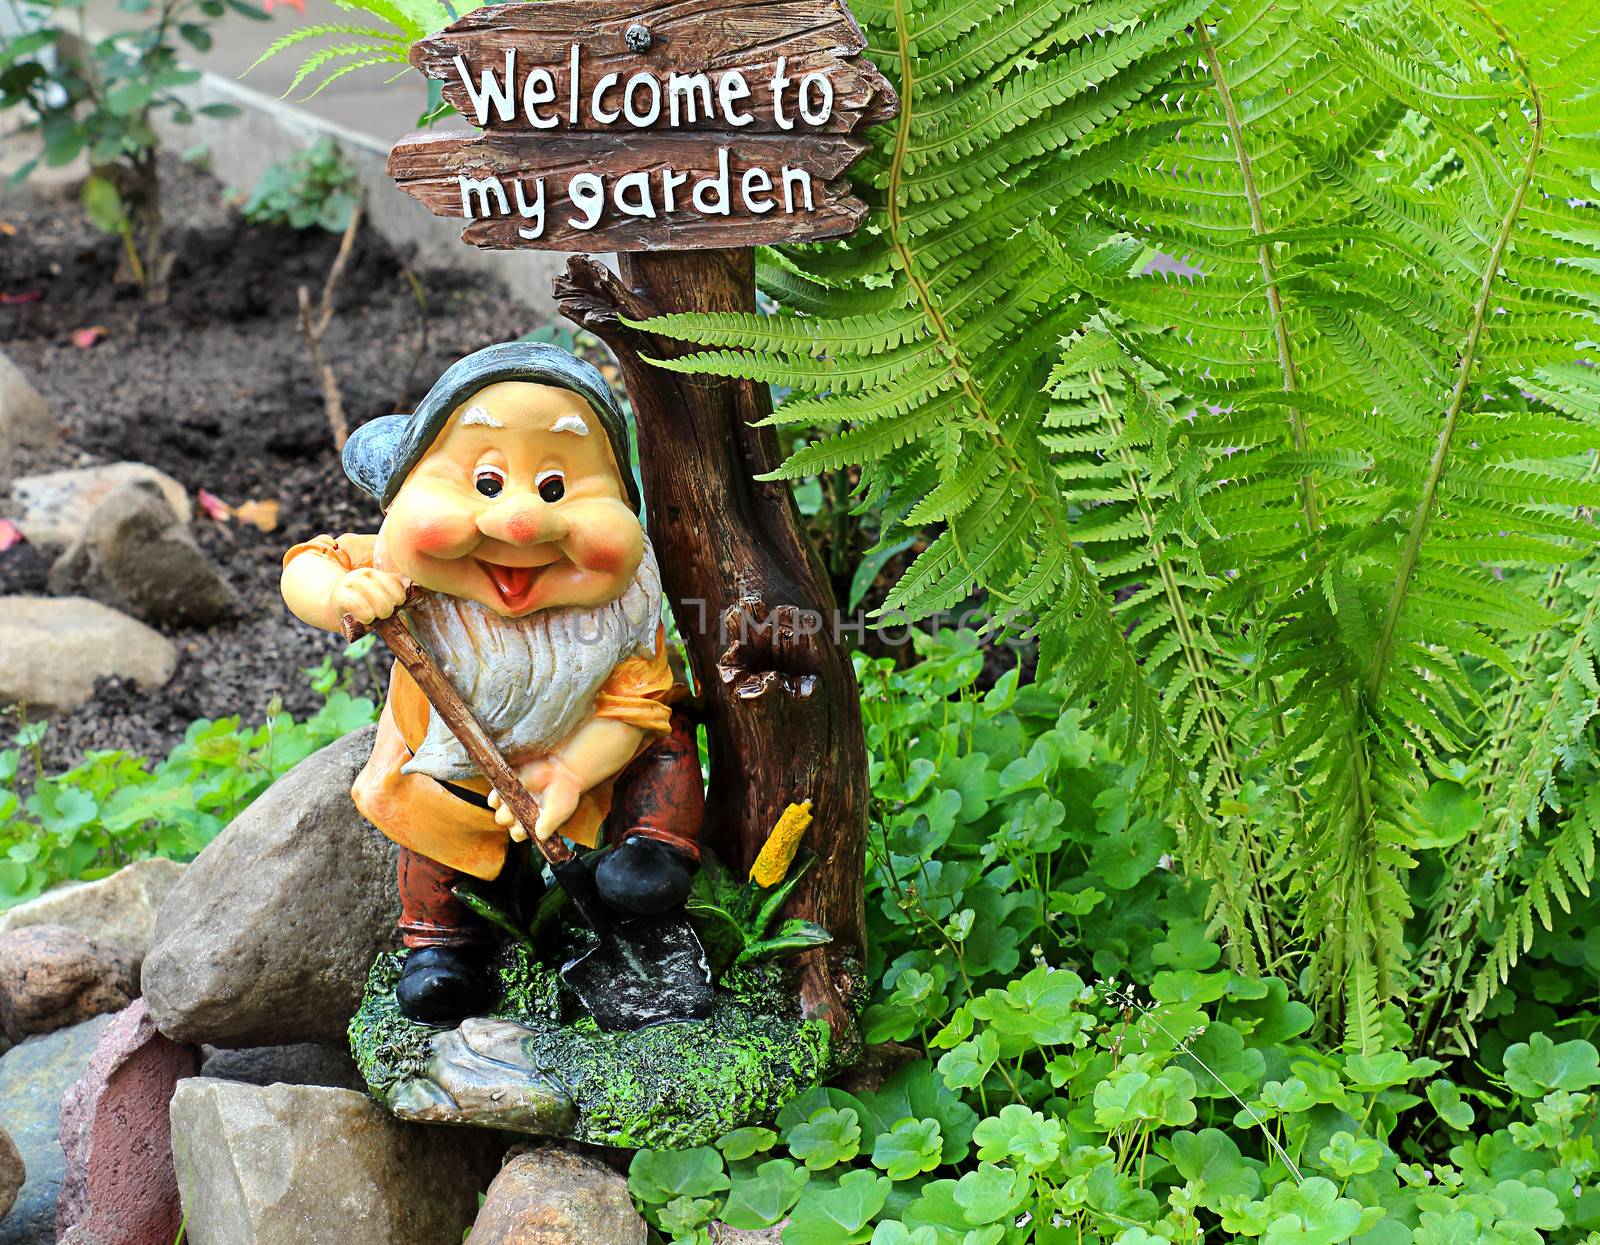 Hilarious funny, smiling dwarf with a white beard, digs earth and invites in your garden